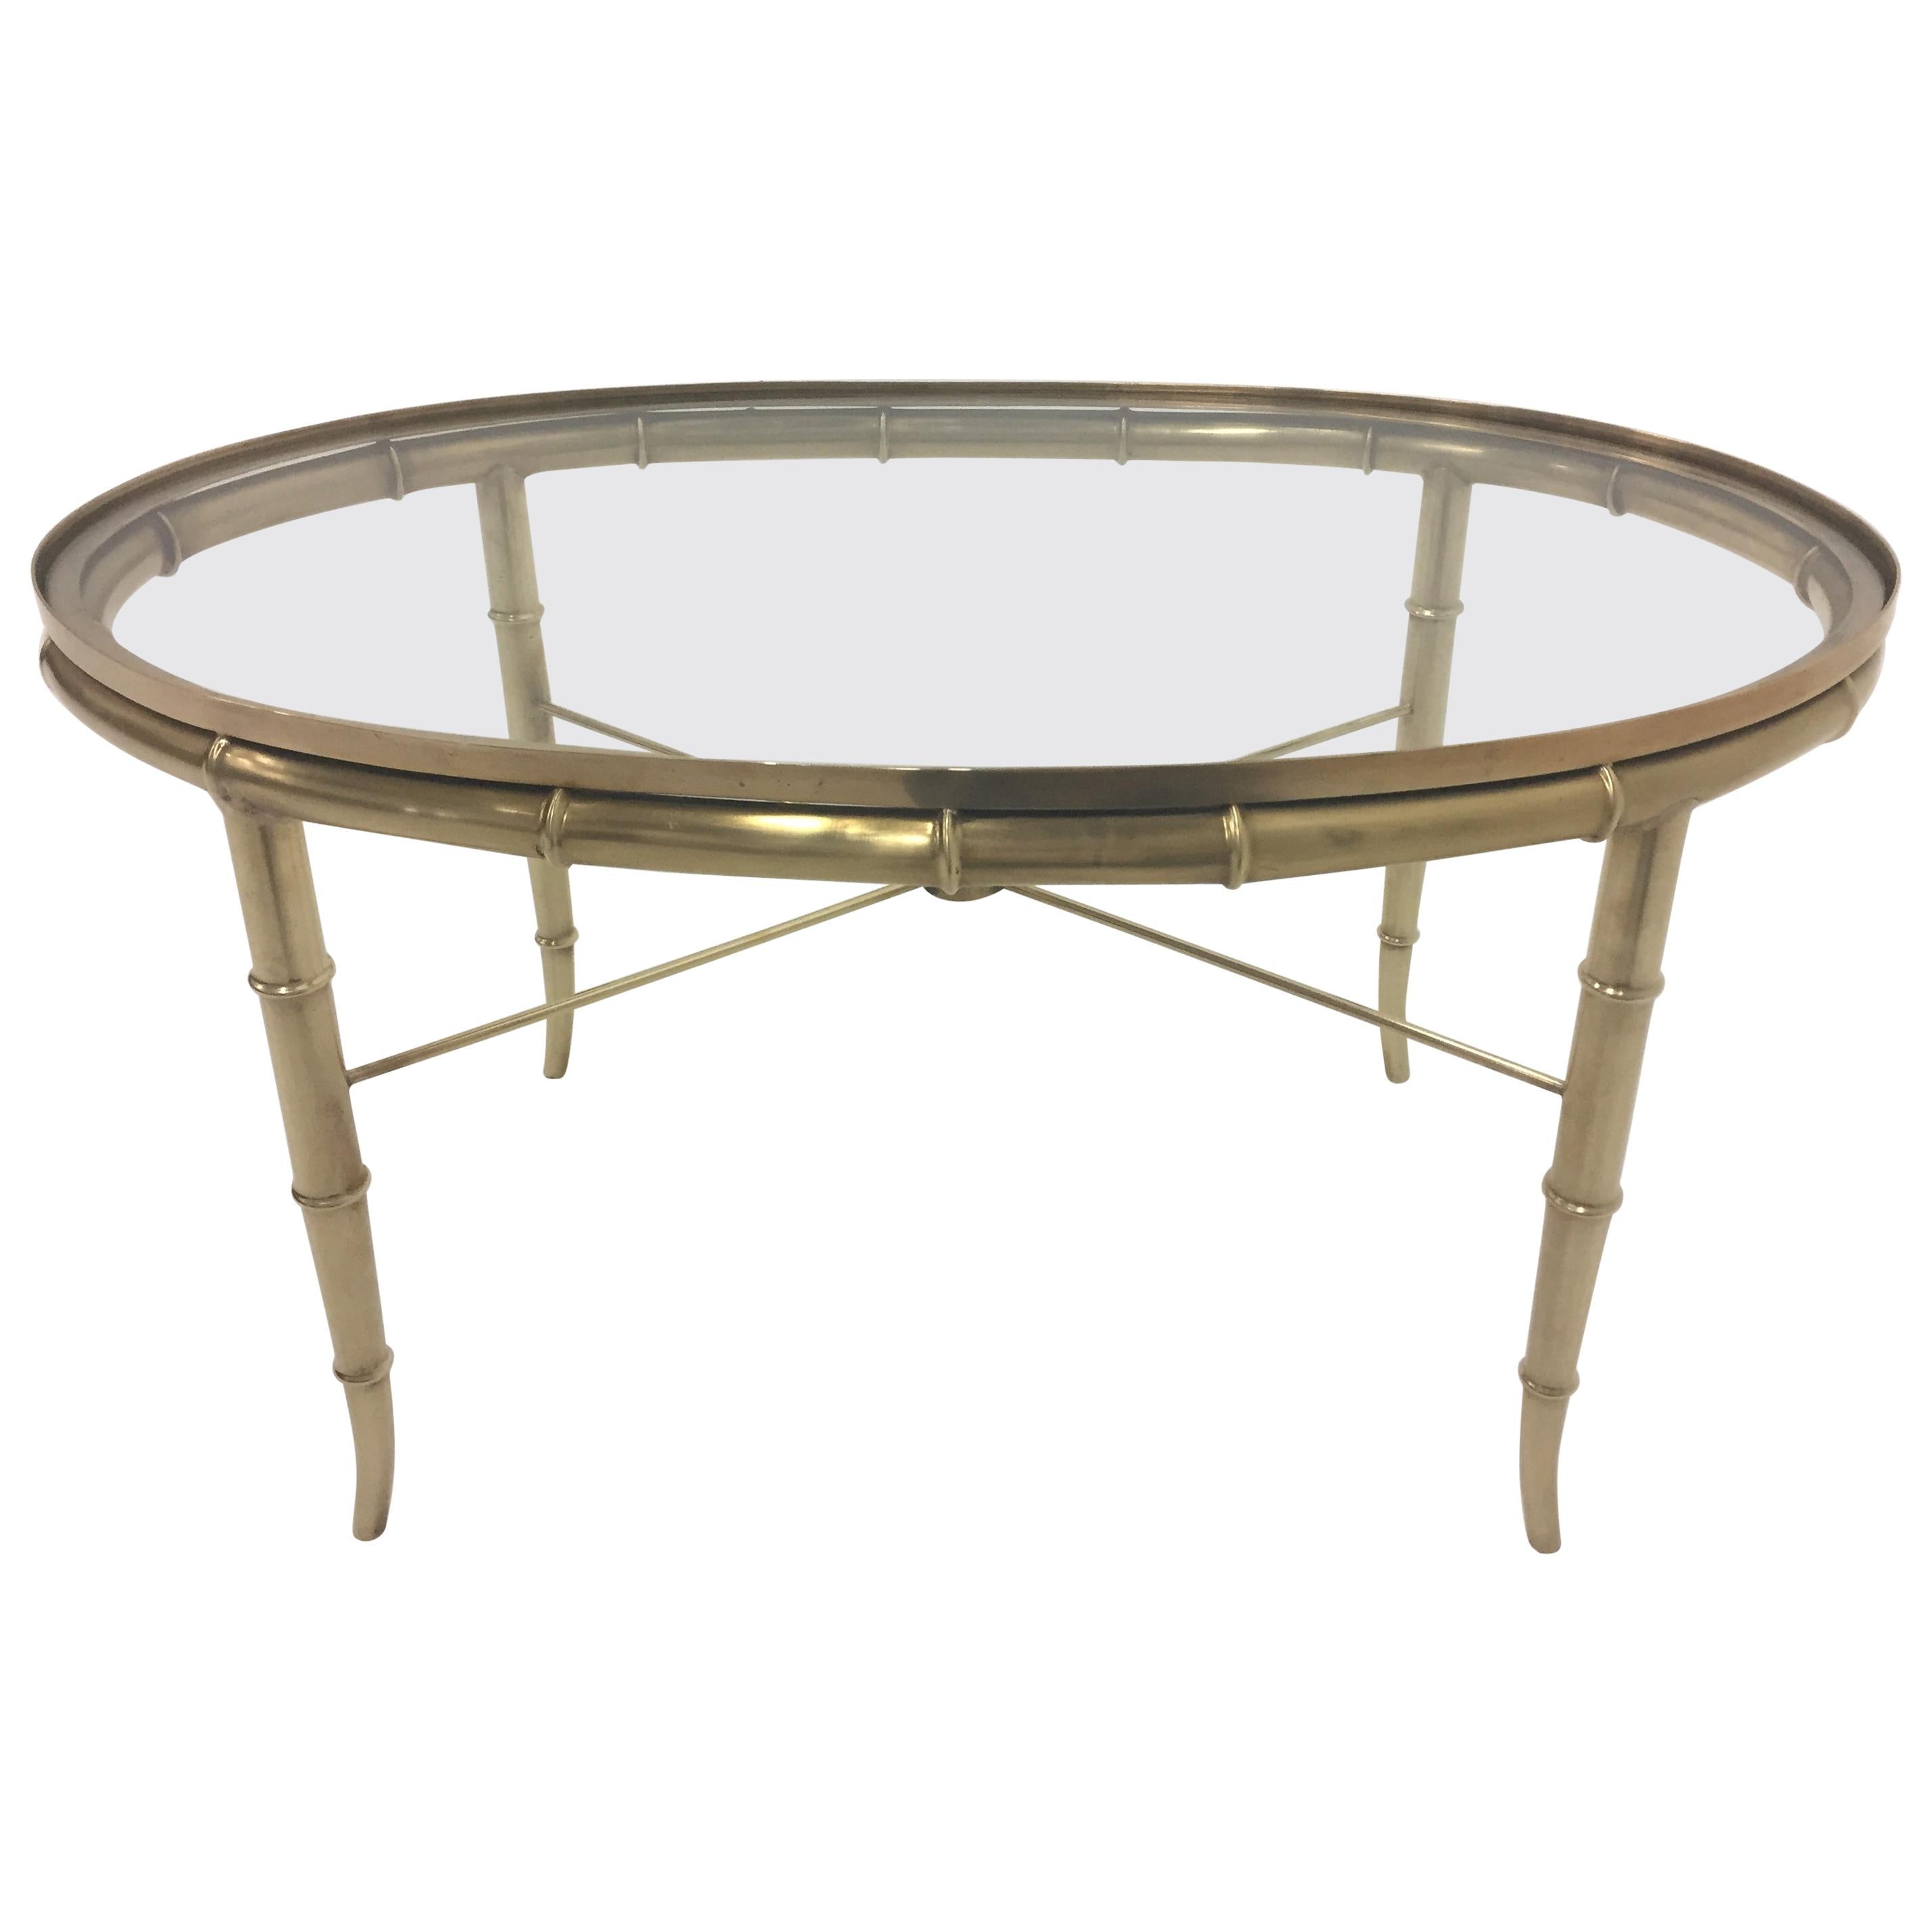 Sophisticated Brass Faux Bamboo Oval Cocktail Table by Mastercraft